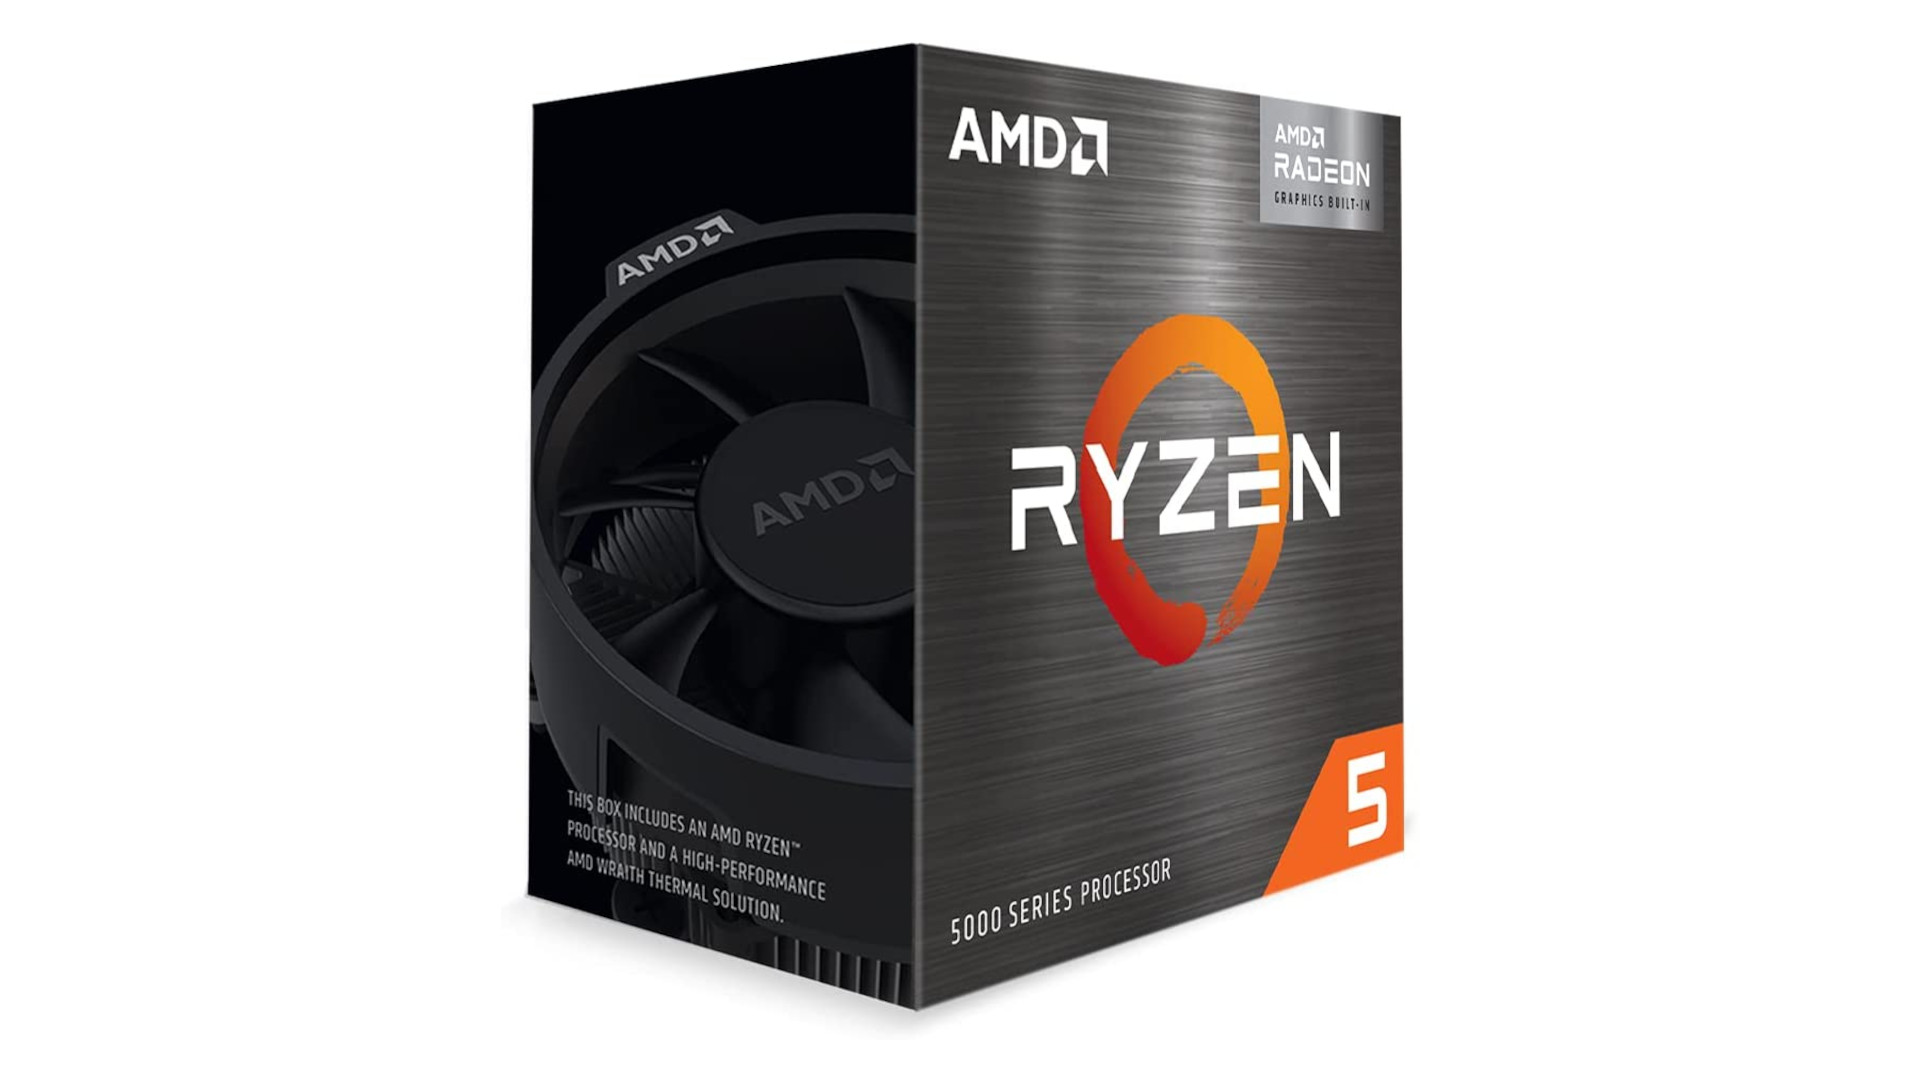 The best CPU with integrated graphics, the AMD Ryzen 5 5600G